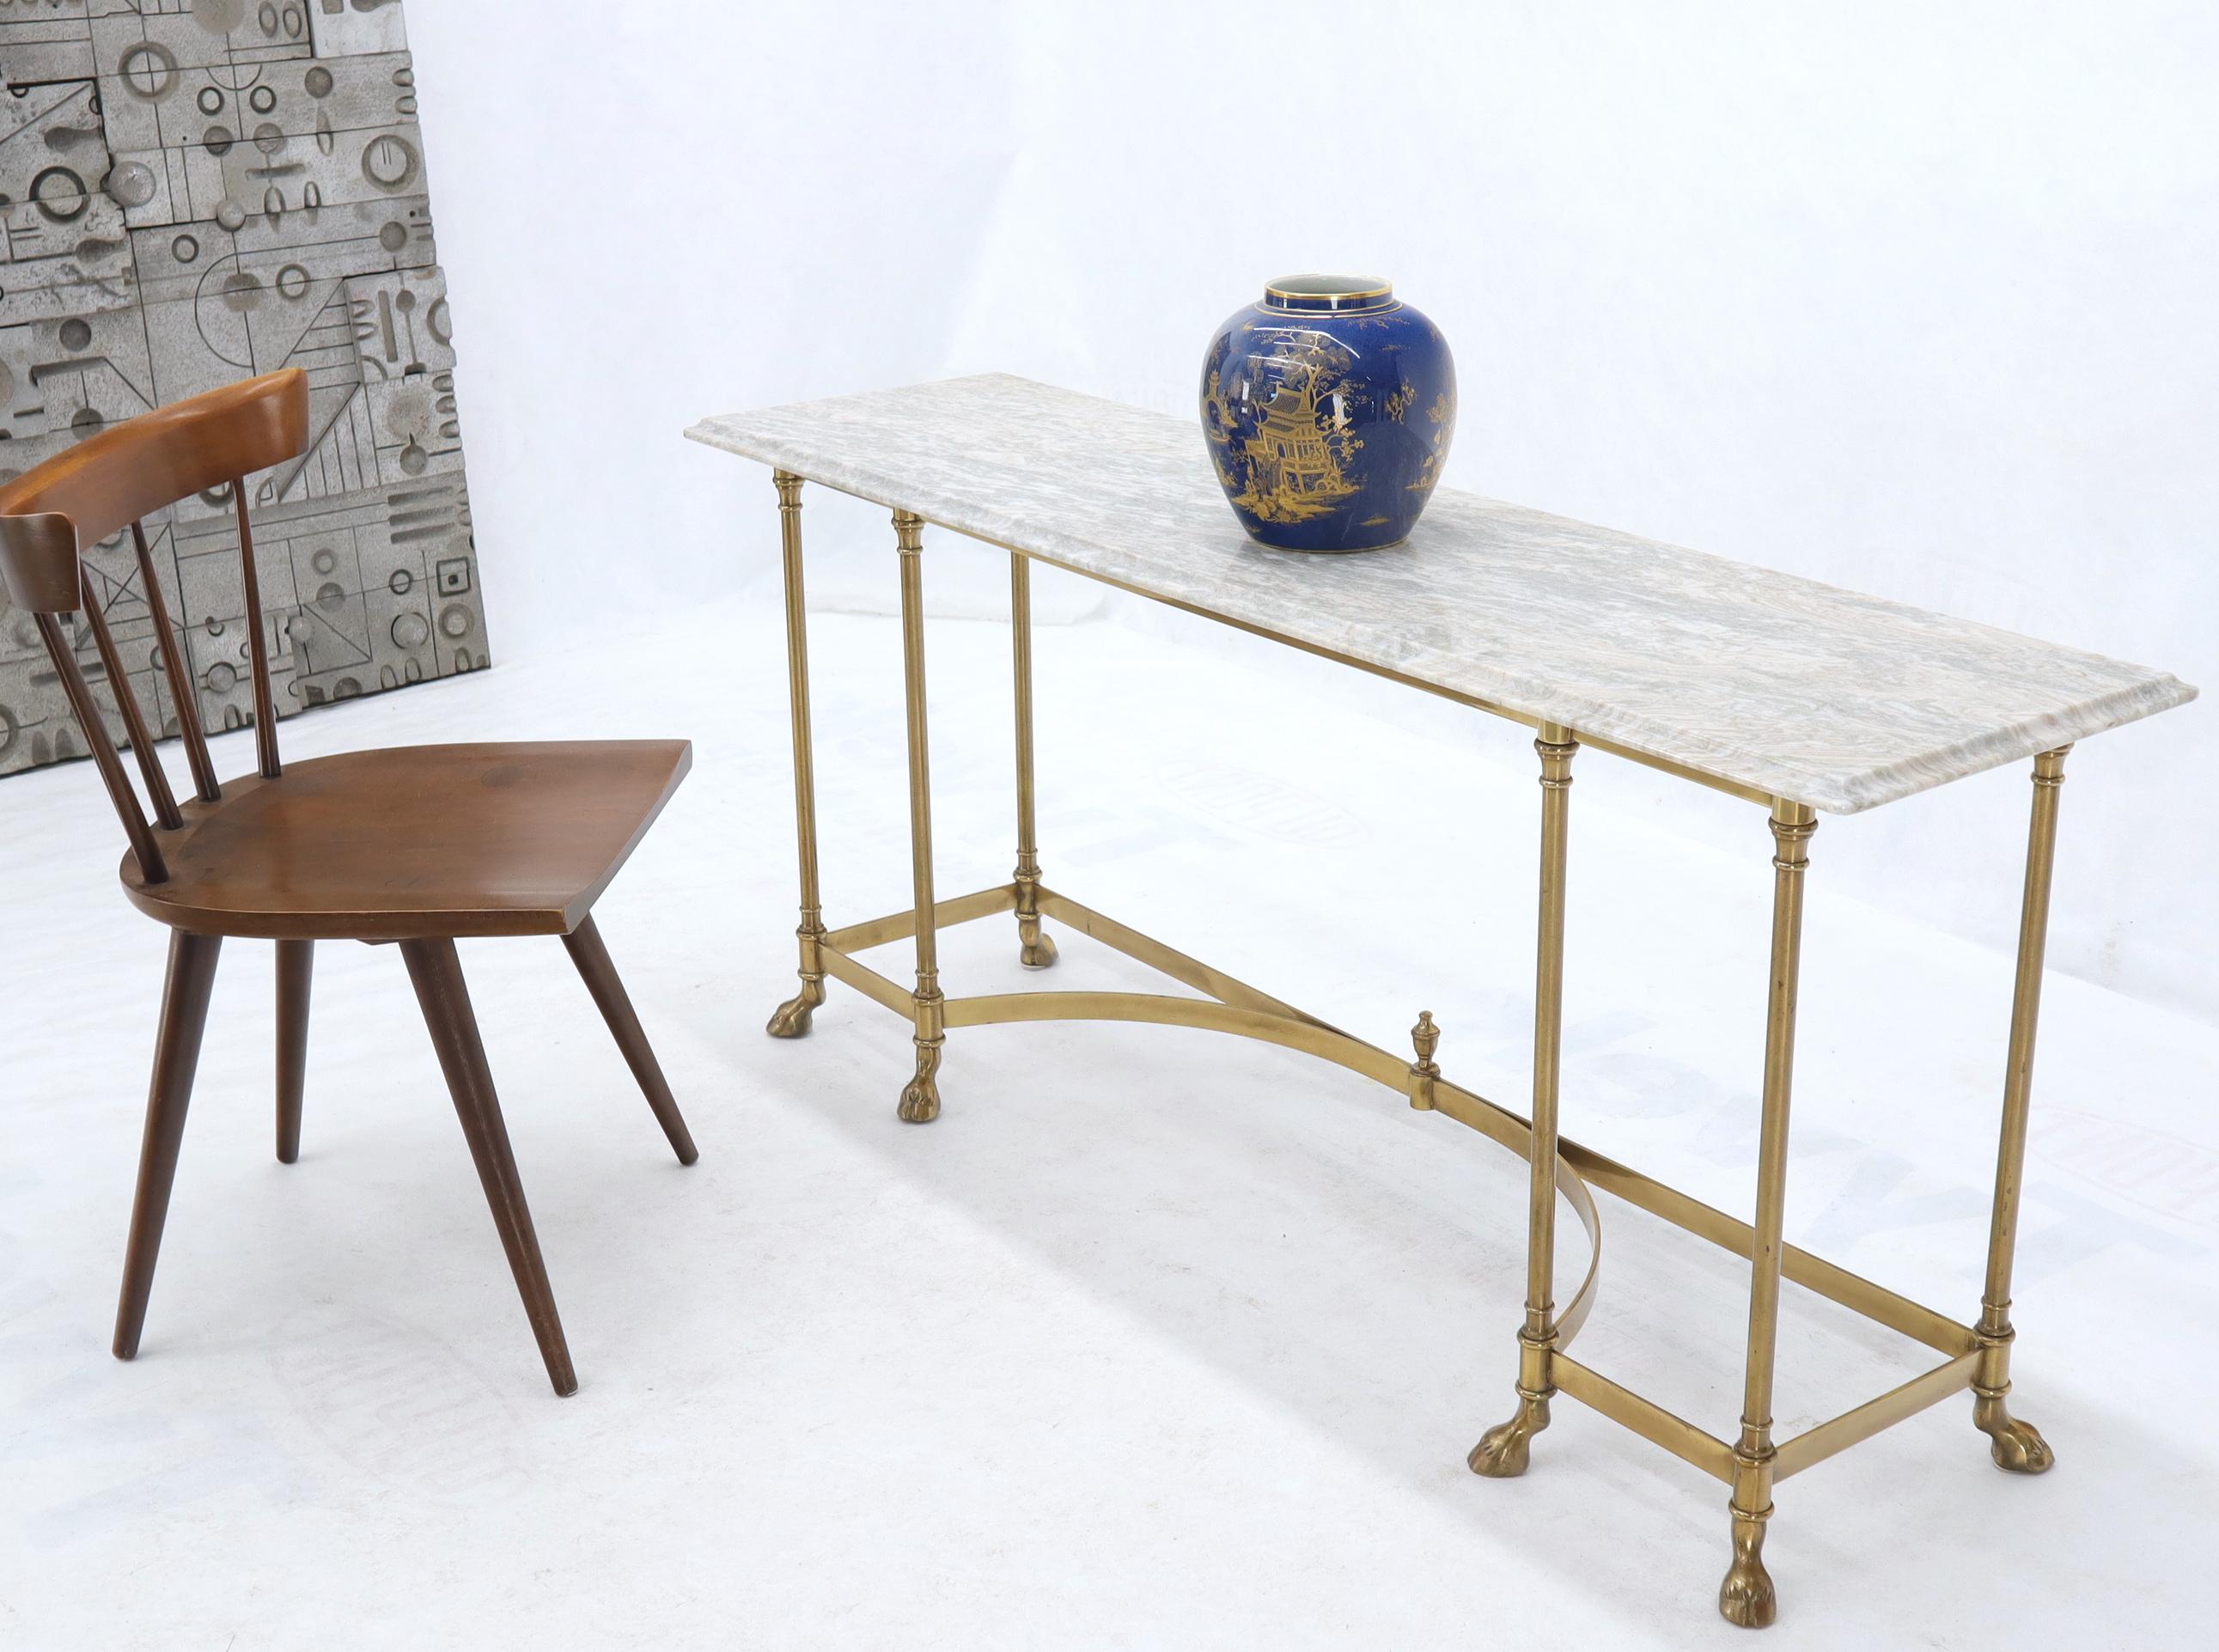 Midcentury Italian modern marble top brass base with hoof feet console table. Maison Jansen style. Made in Italy.